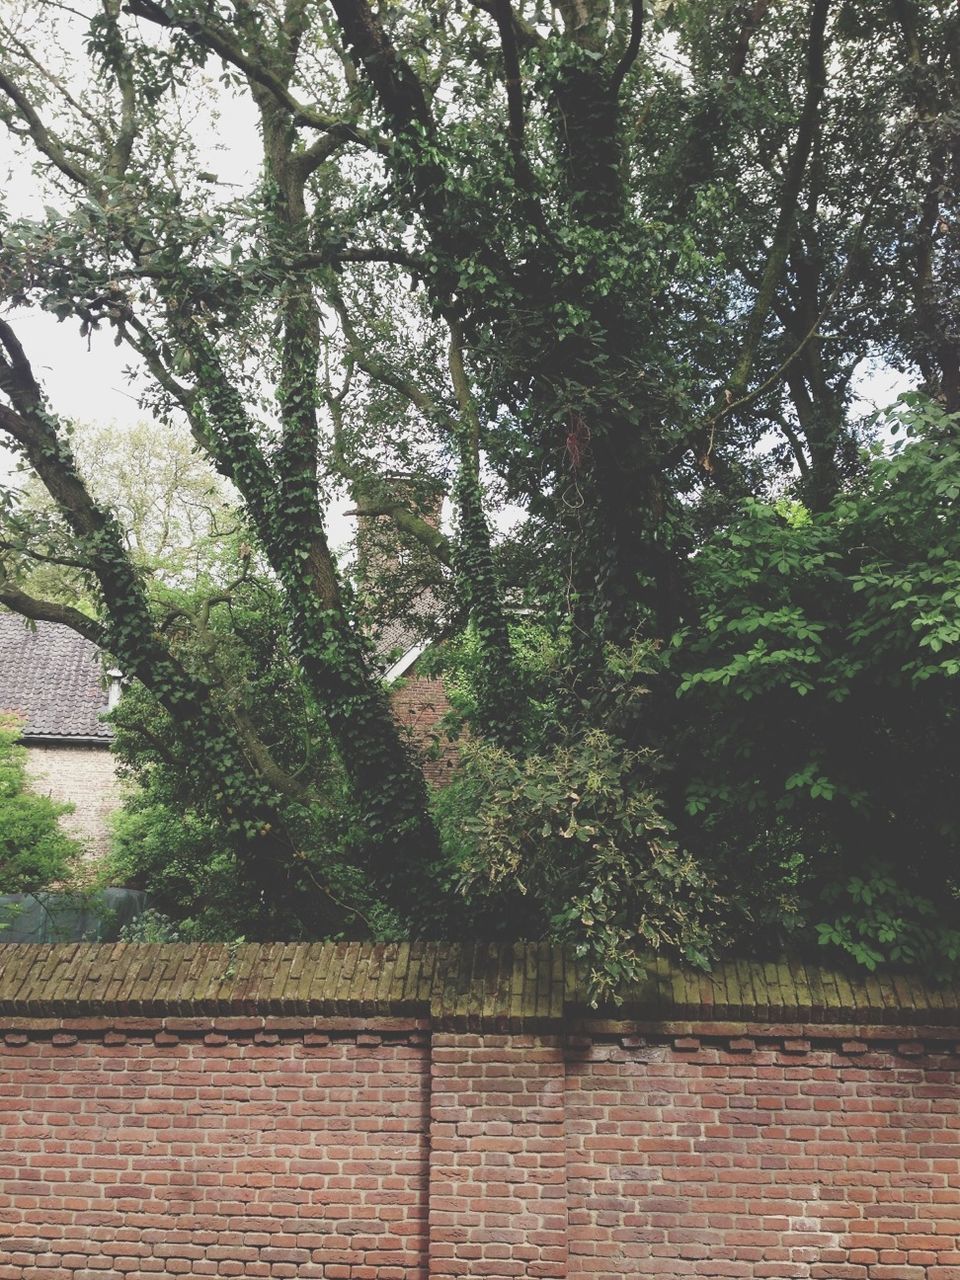 tree, growth, built structure, building exterior, architecture, green color, branch, plant, nature, outdoors, day, low angle view, no people, house, wall - building feature, brick wall, lush foliage, tranquility, sky, growing